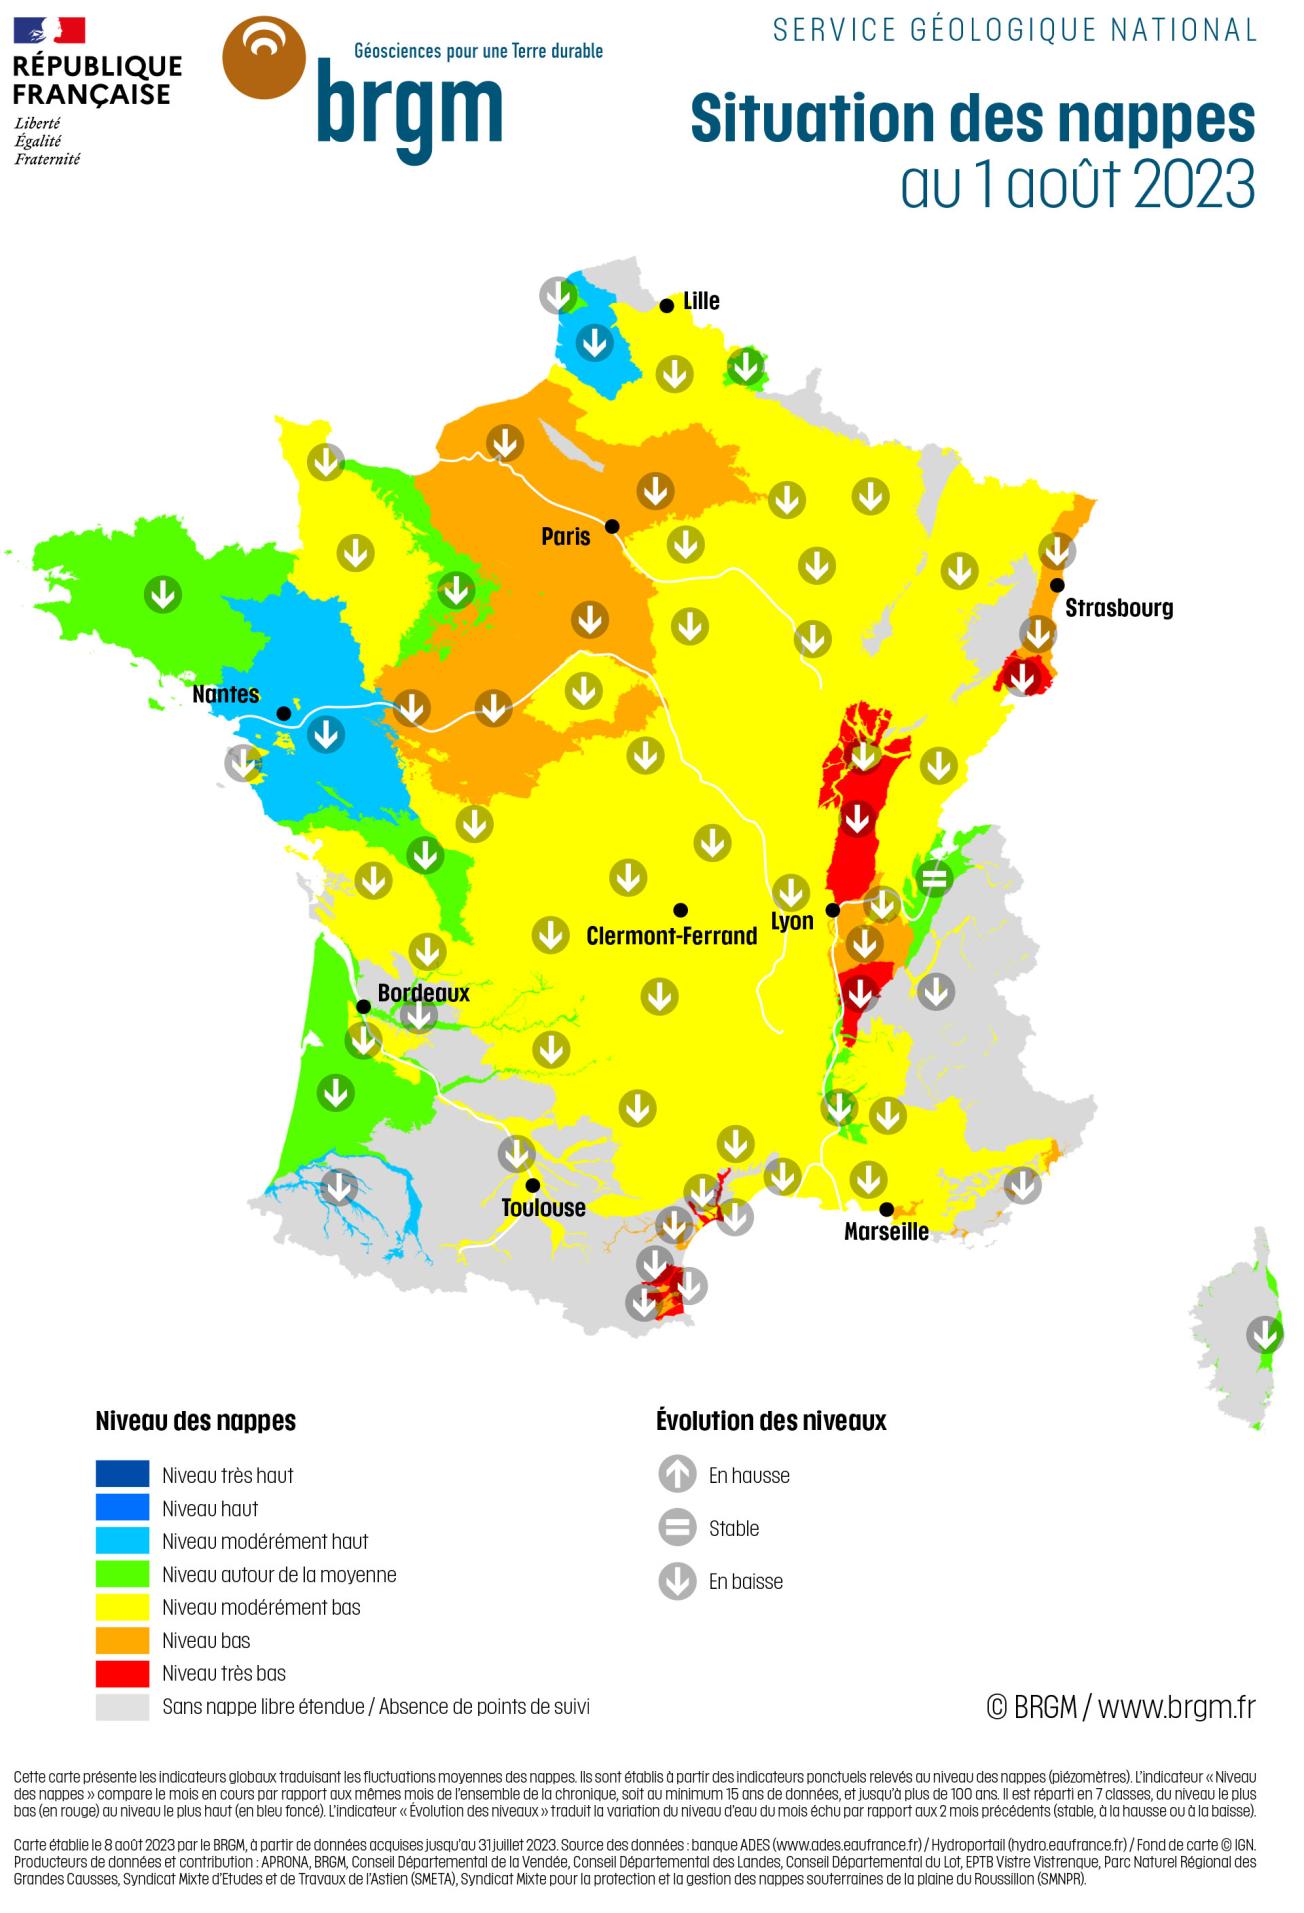 Map of aquifer levels in mainland France on 1 August 2023.